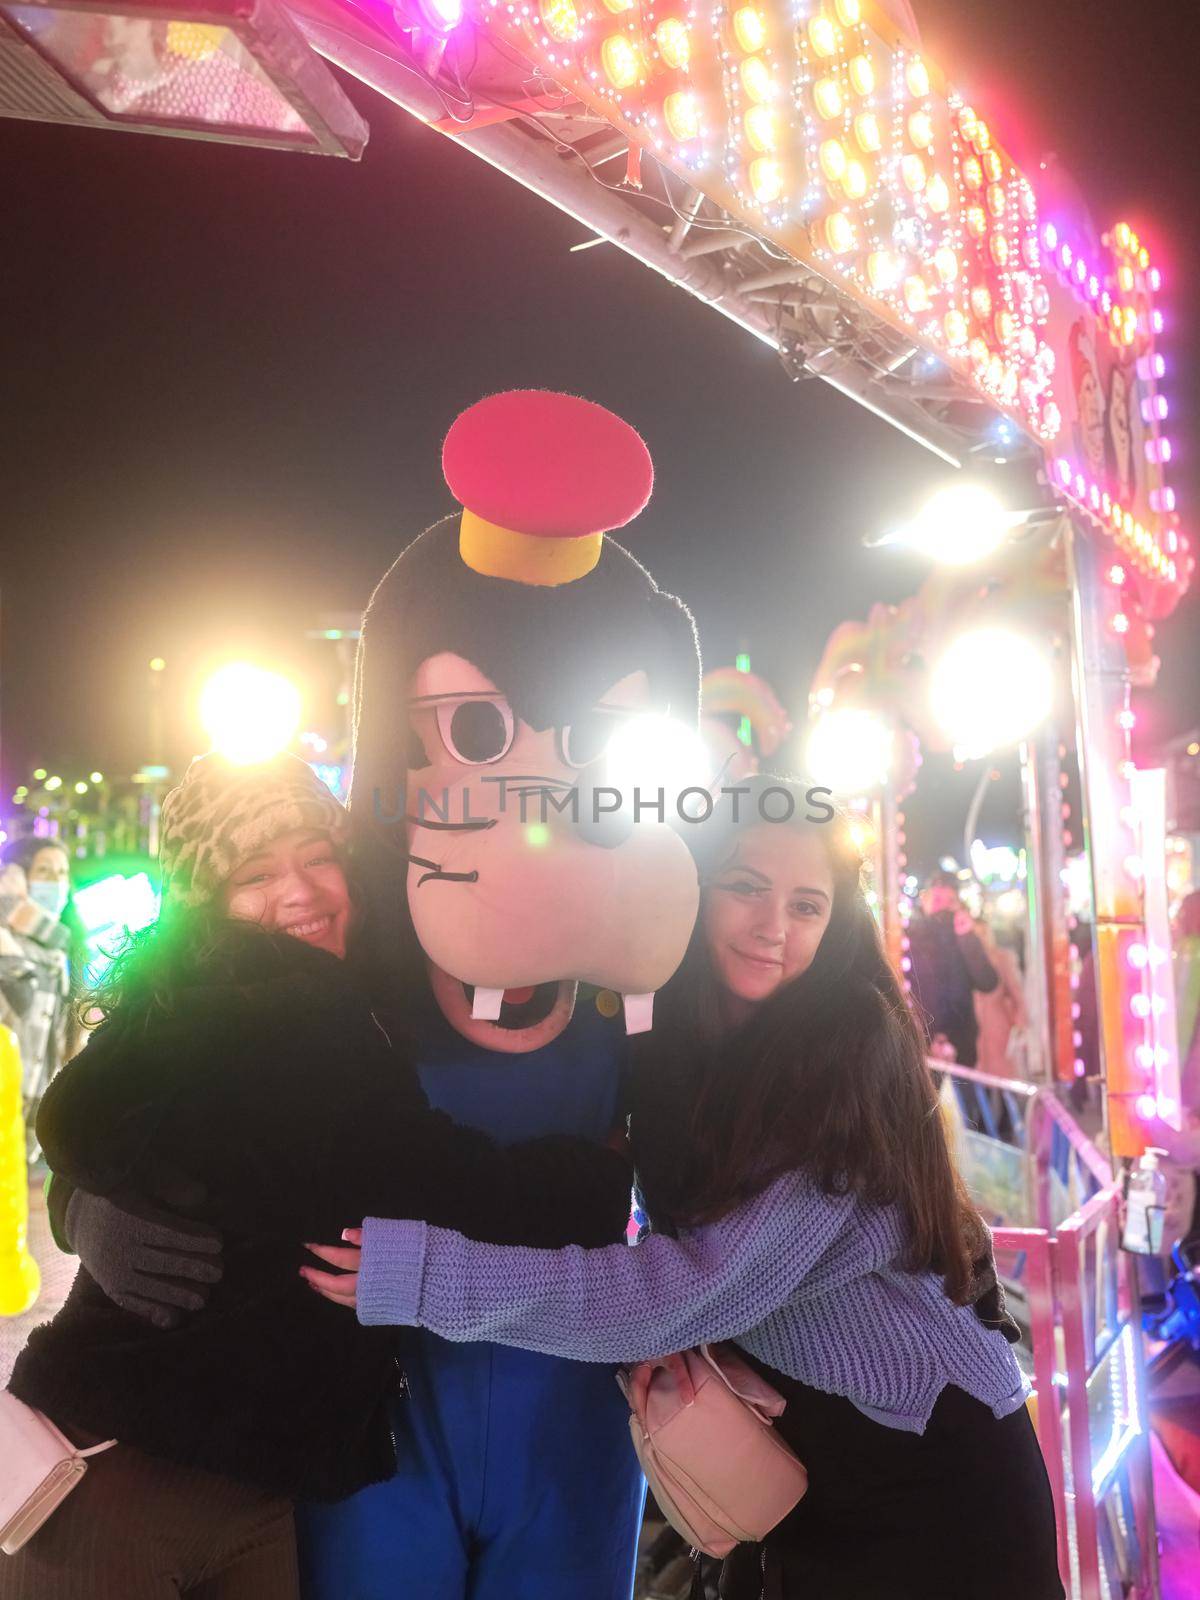 Girls embracing an actor dressed like Goofy dog in a theme park at night by WesternExoticStockers